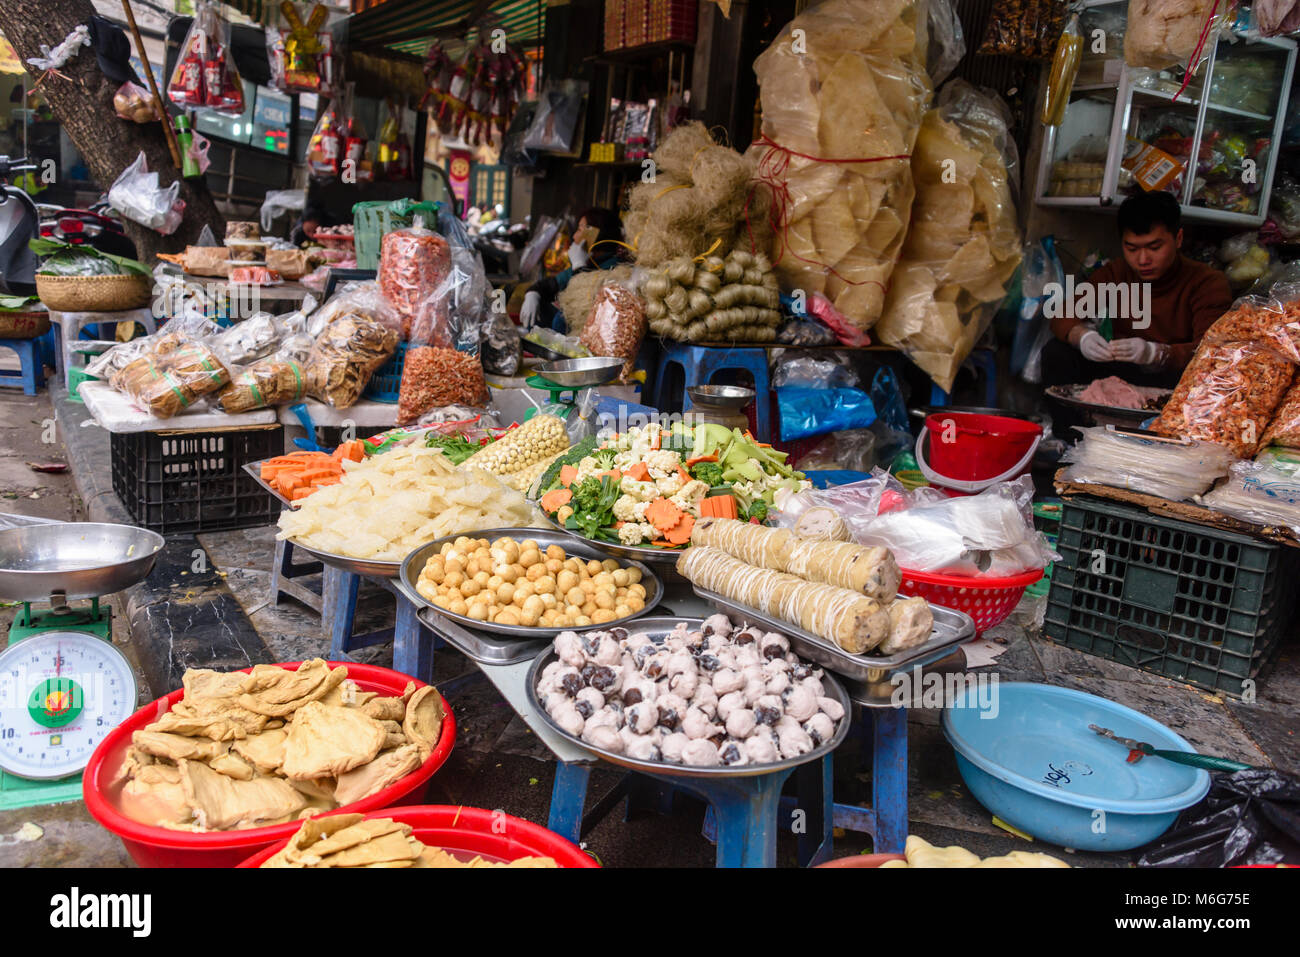 Ingredients for street food at a pop-up restaurant on a footpath in Hanoi, Vietnam Stock Photo